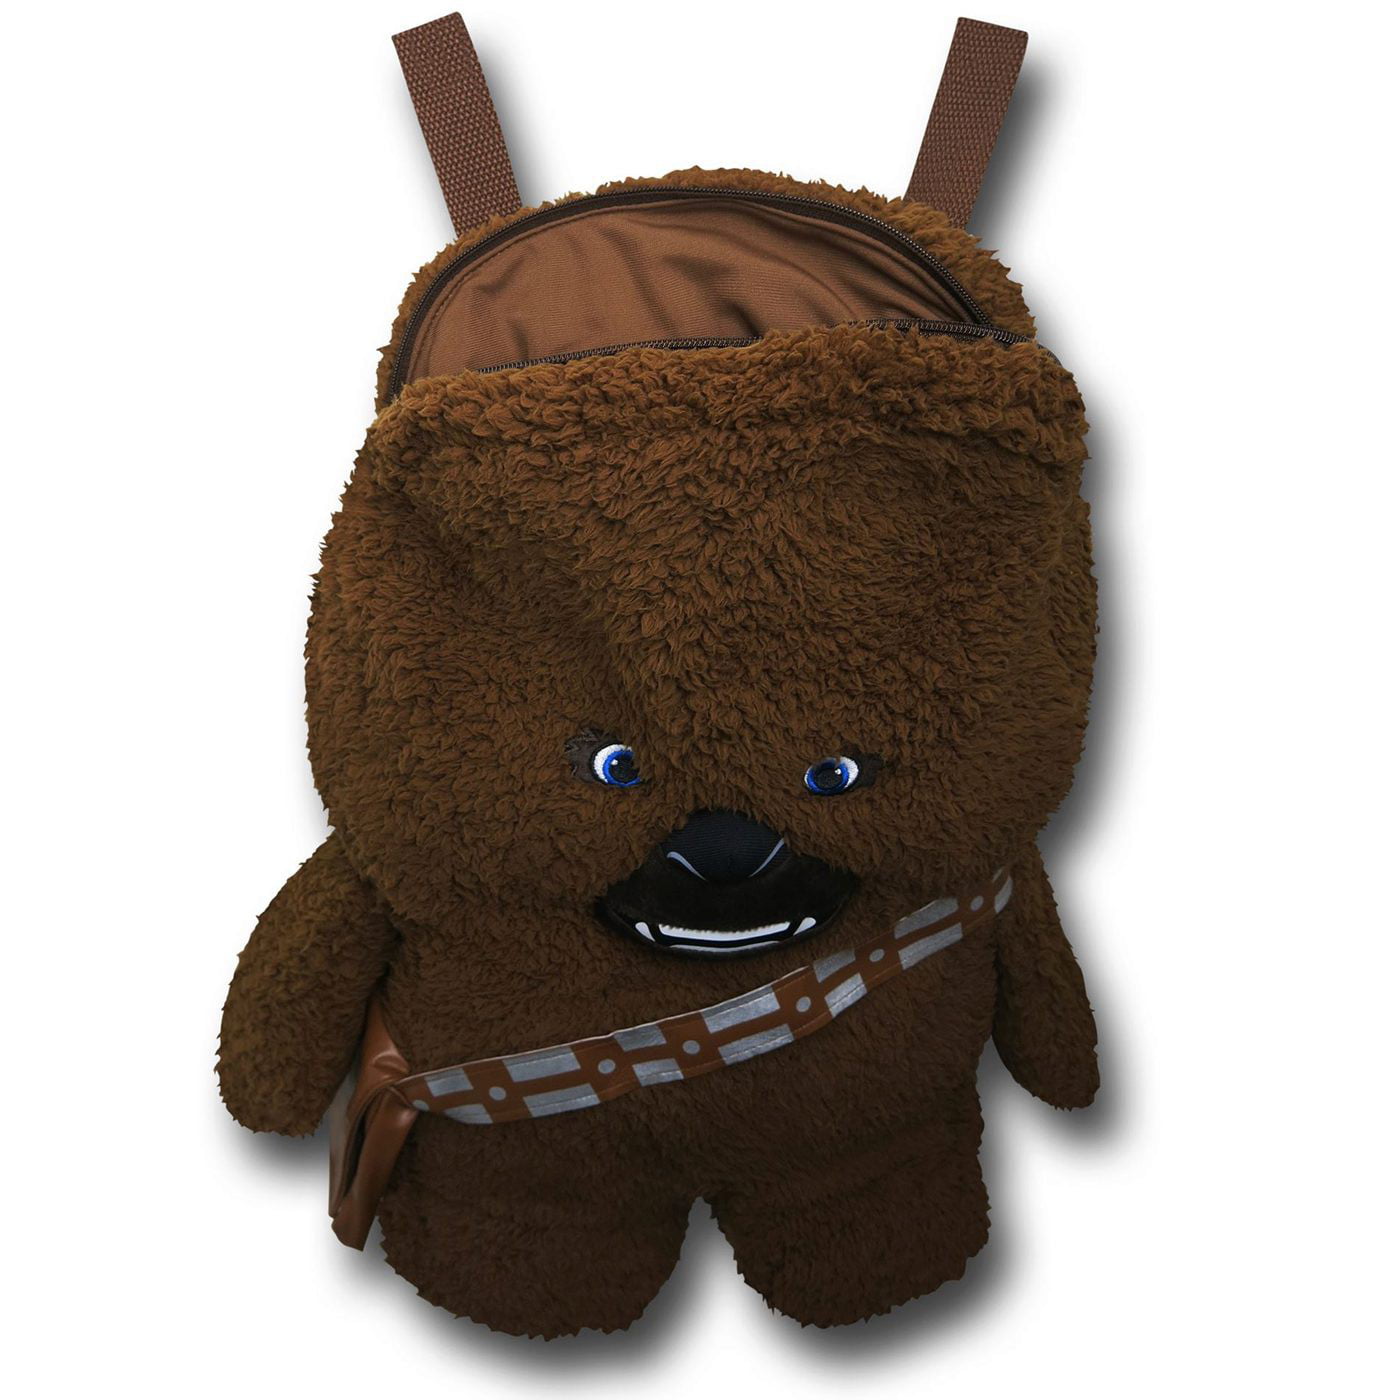 Contour Vagrant Planned Comic Images Backpack Pals Star Wars Chewbacca - Walmart.com